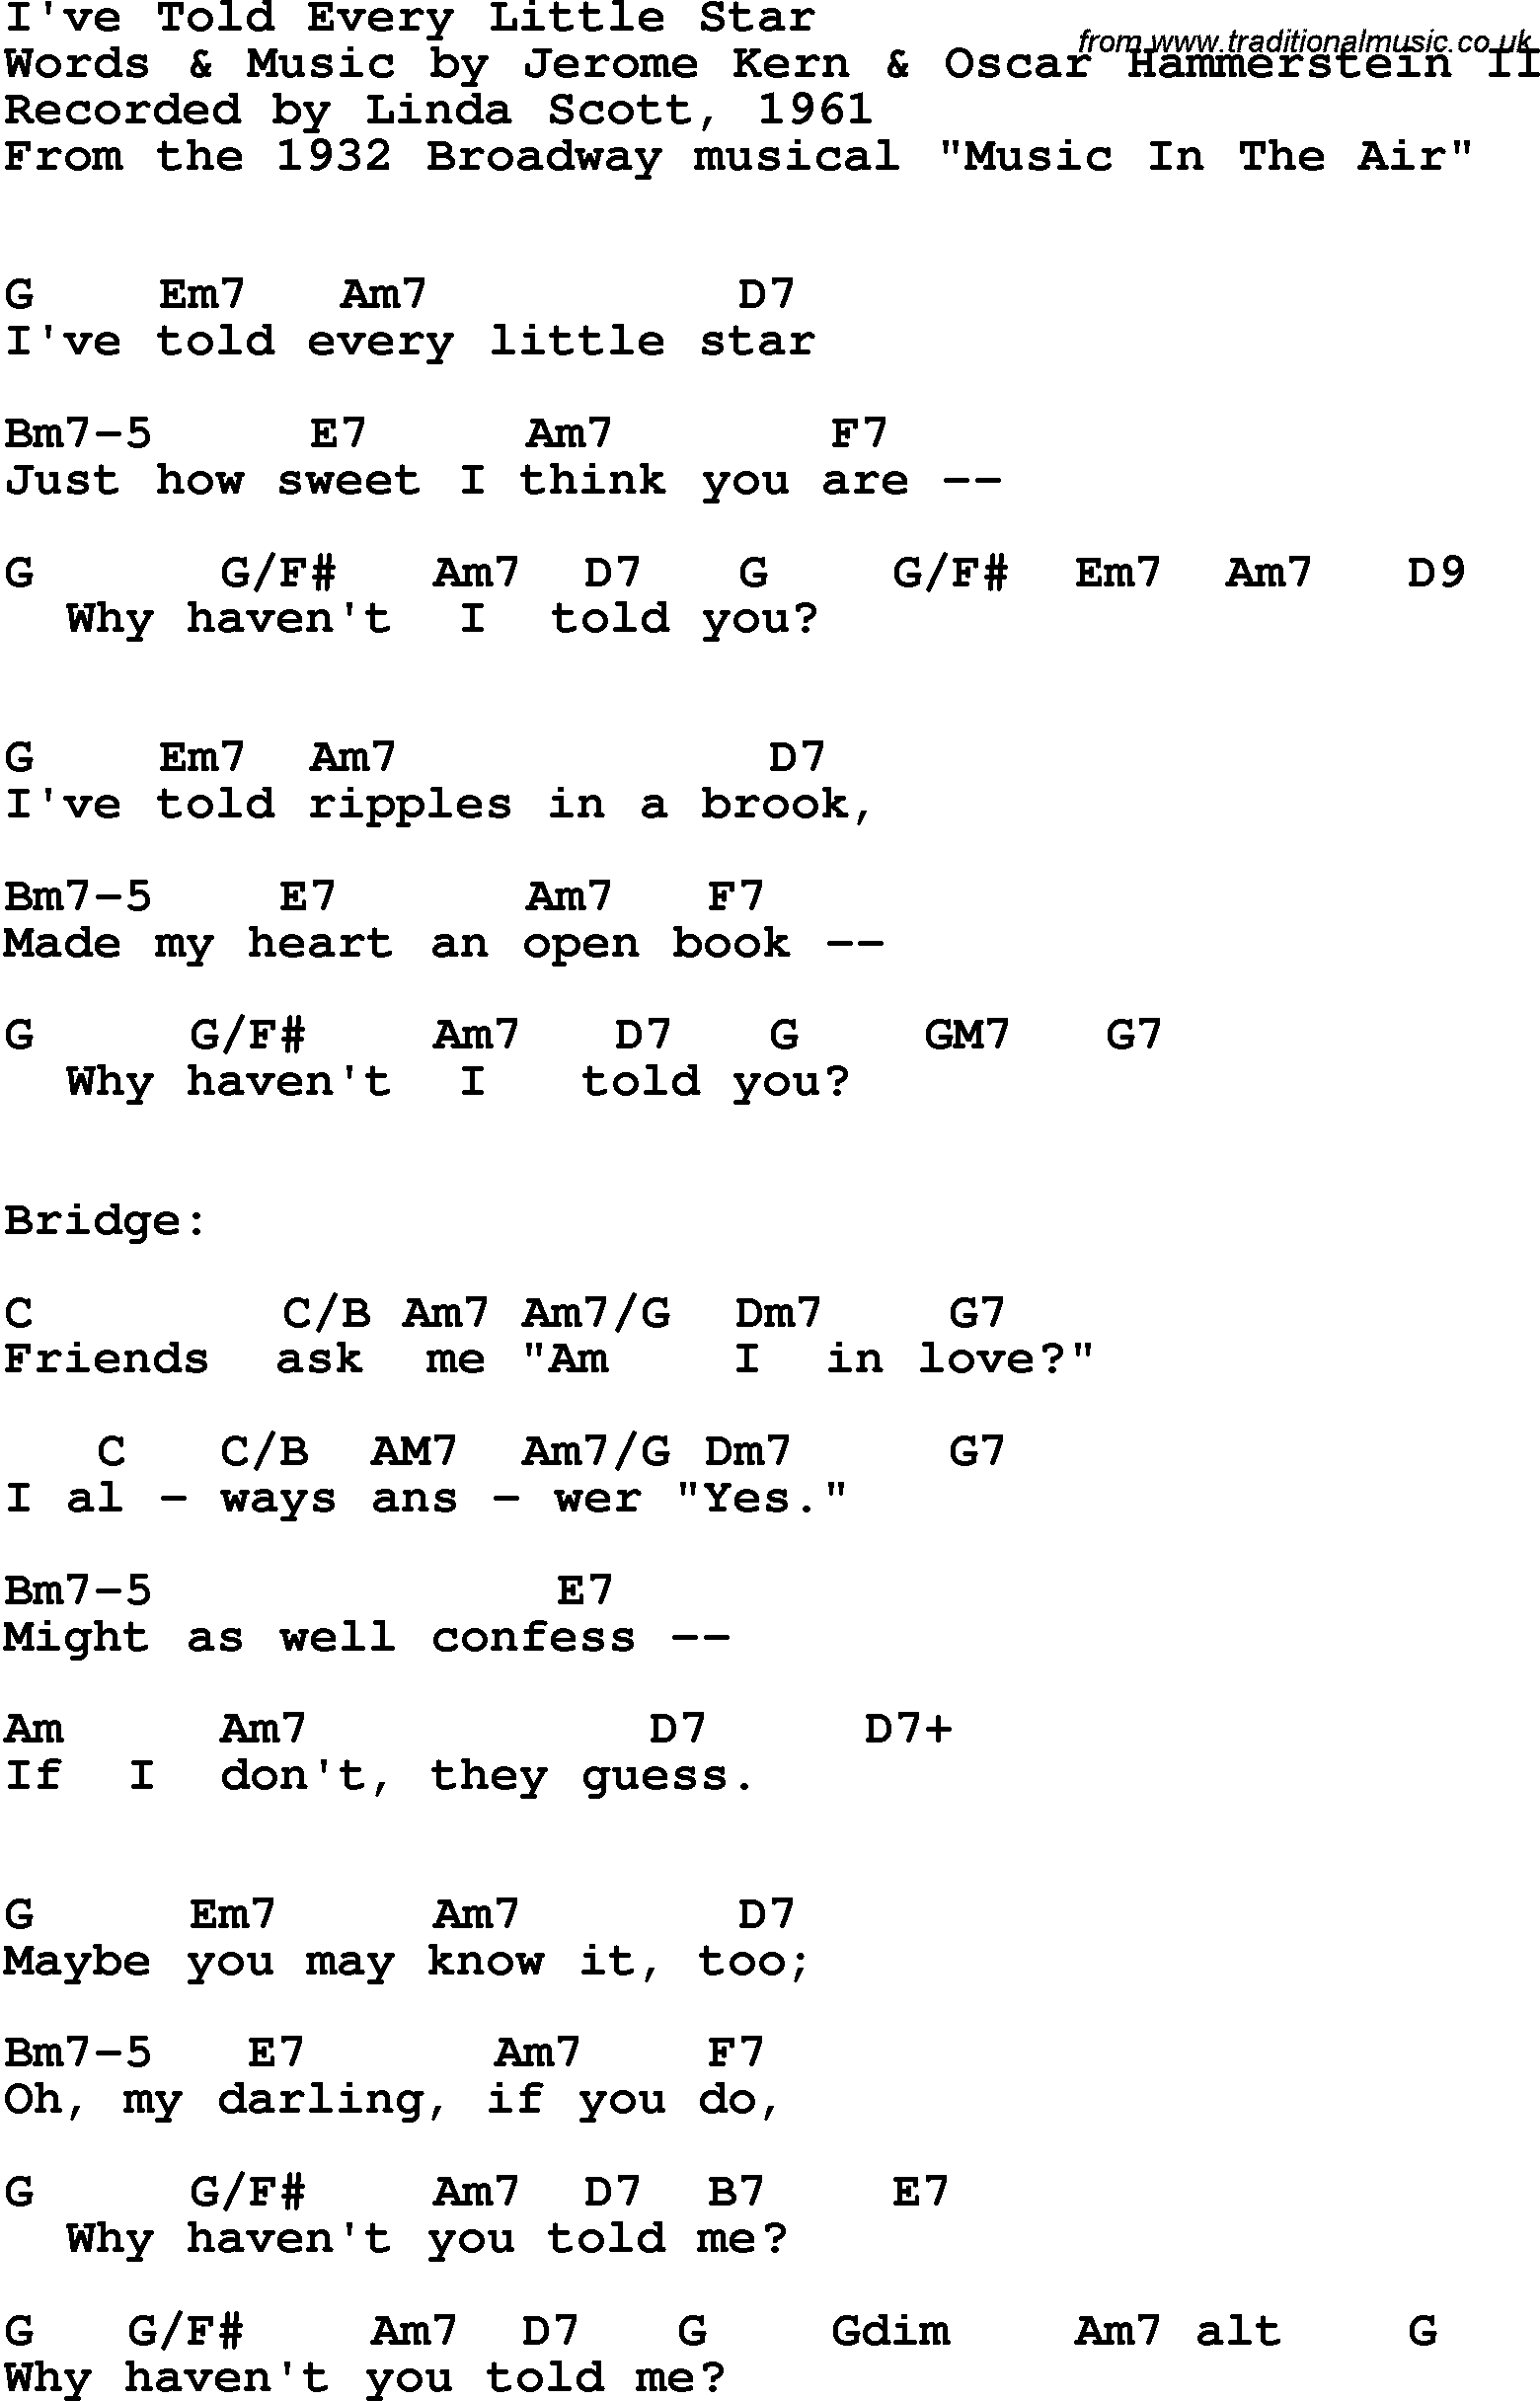 Song Lyrics with guitar chords for I've Told Every Little Star - Linda Scott, 1961